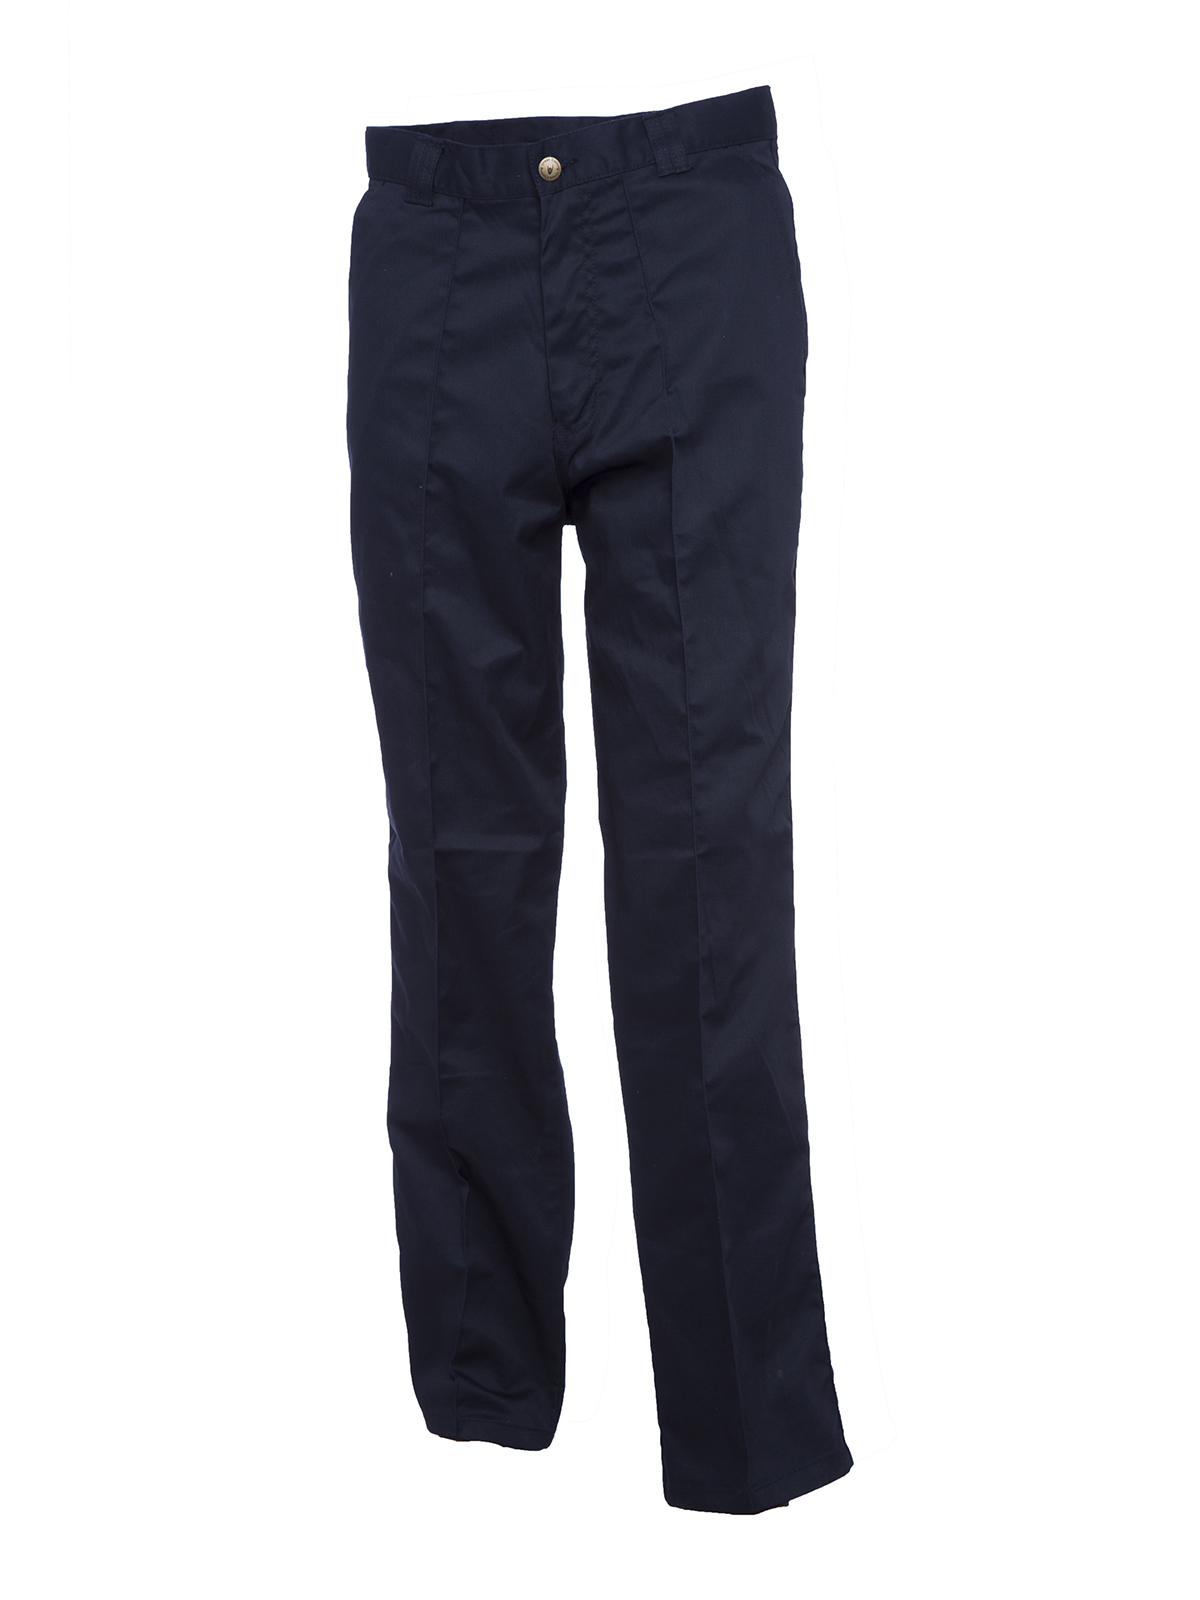 Workwear Trousers, Navy Blue - 36R